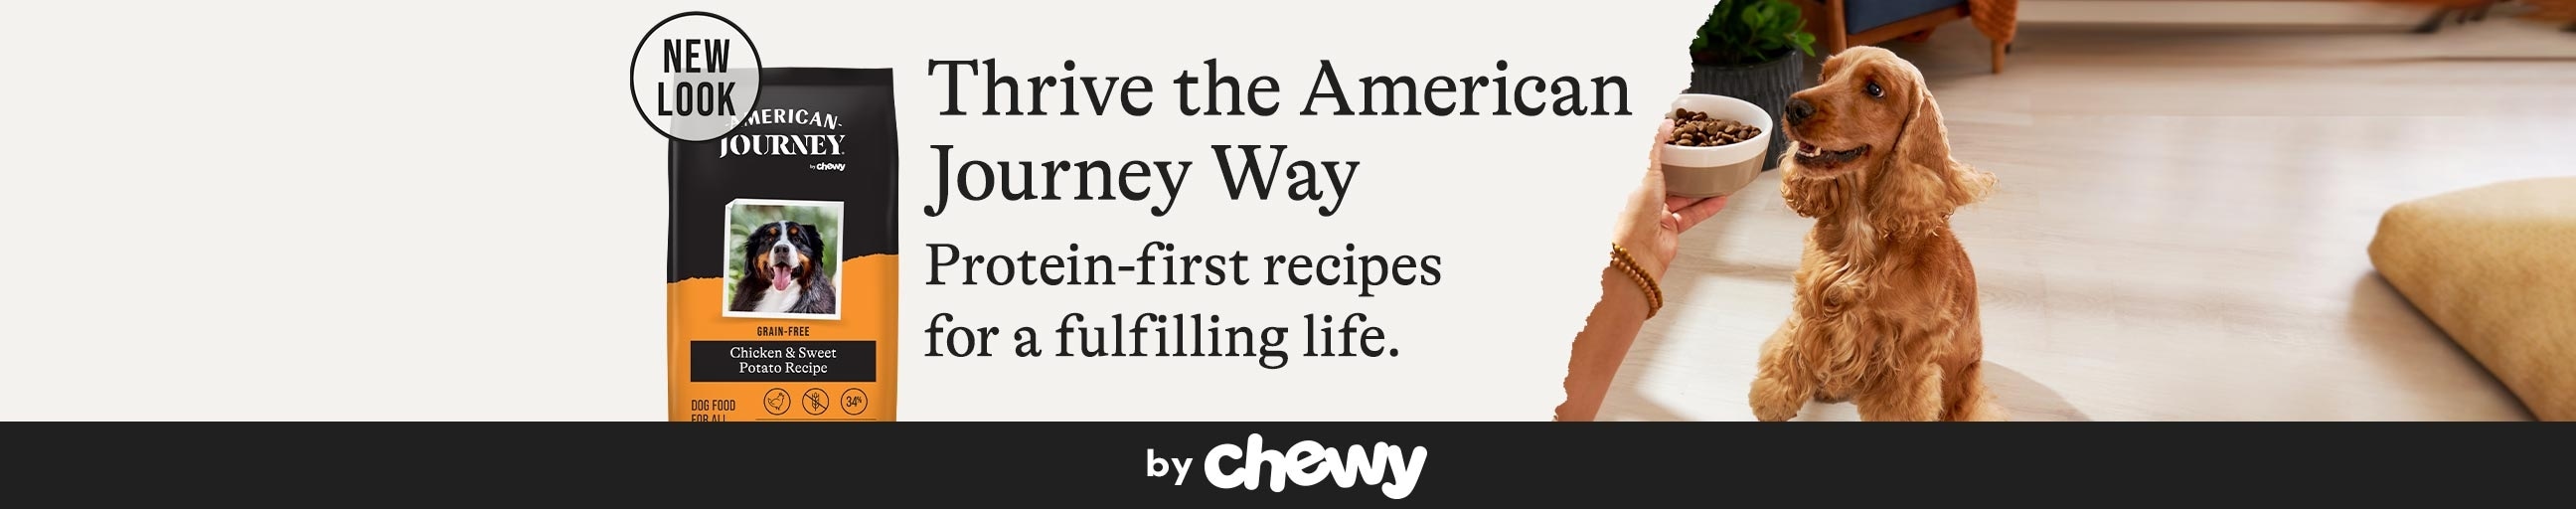 New Look Thrive the American Journey Way. Protein-first recipes for a fulfilling life. By Chewy